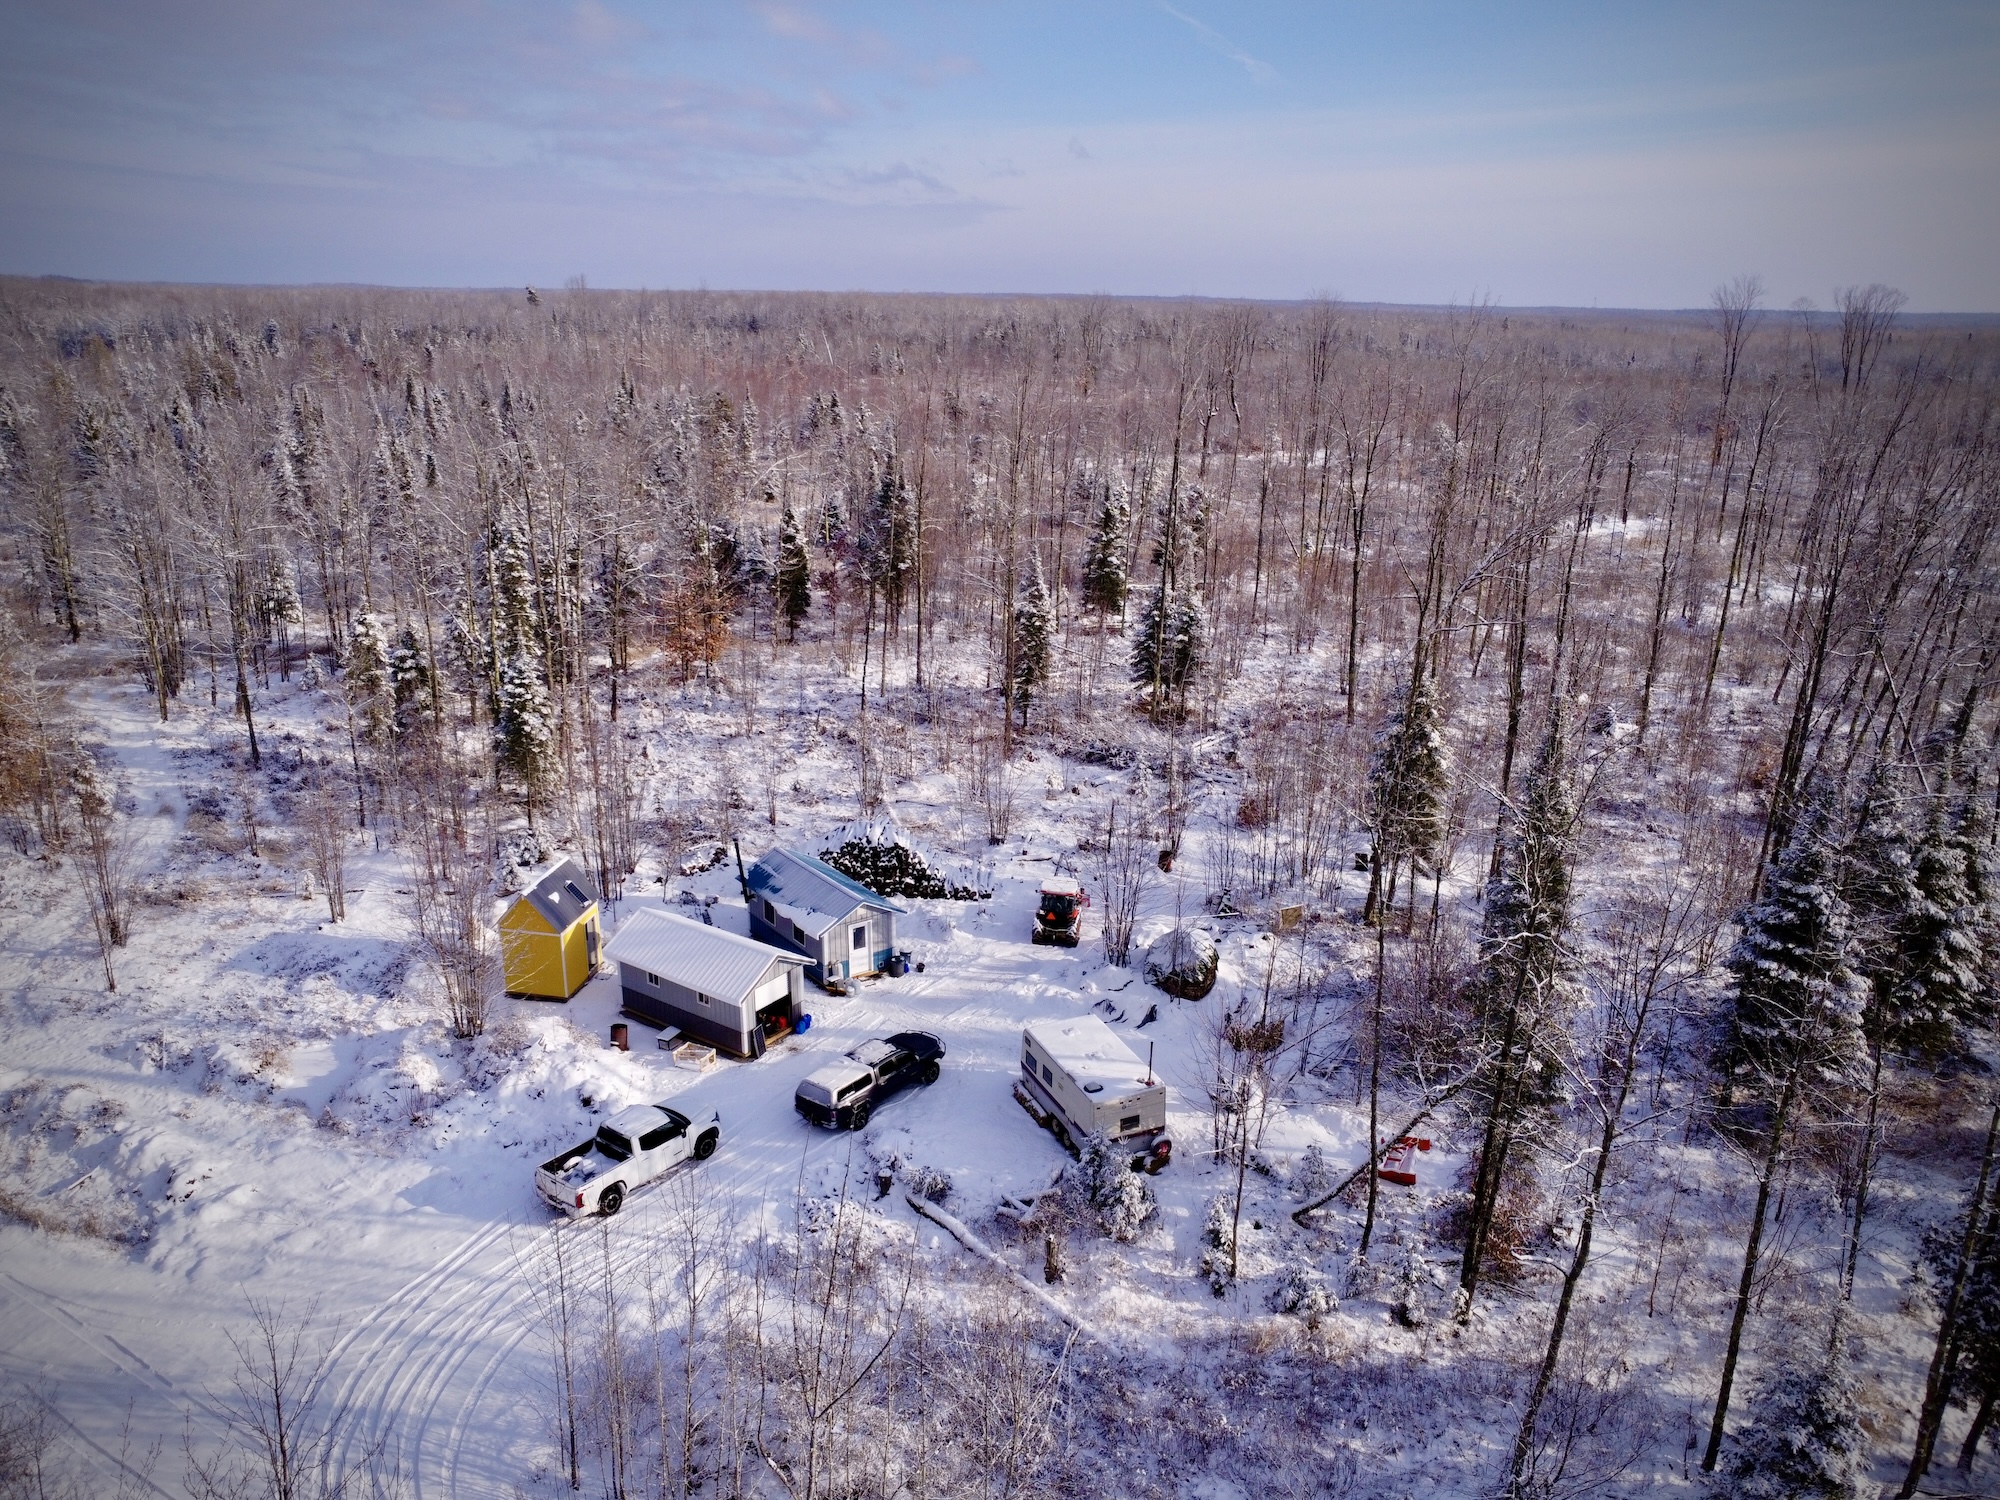 Arial photo of our camp. Three buildings and snow on the ground